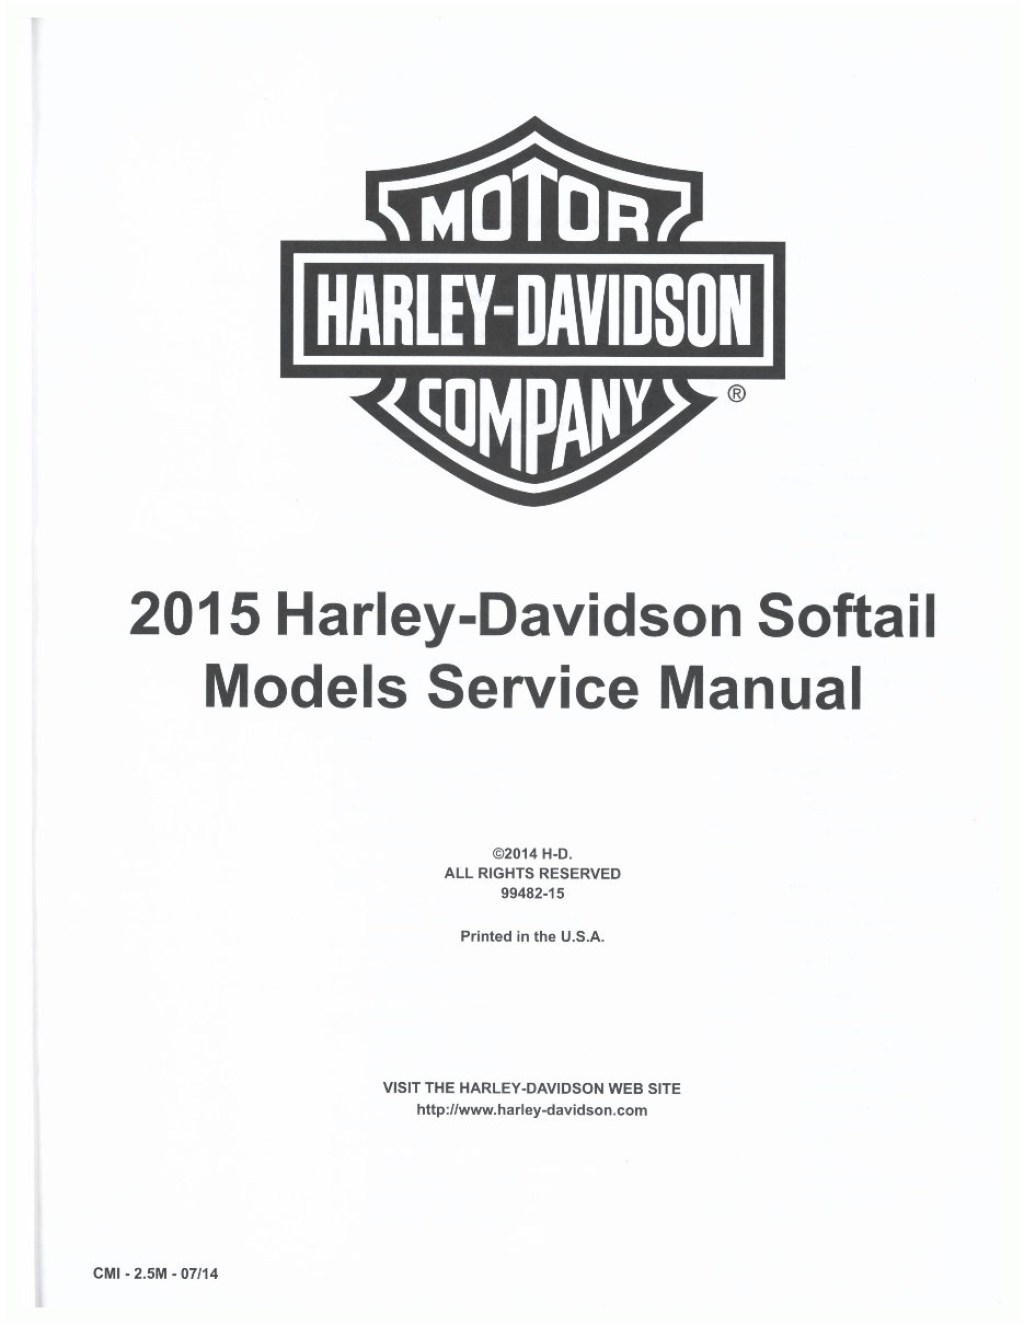 Picture of: HARLEY-DAVIDSON Softail FXSB BREAKOUT Service Manual